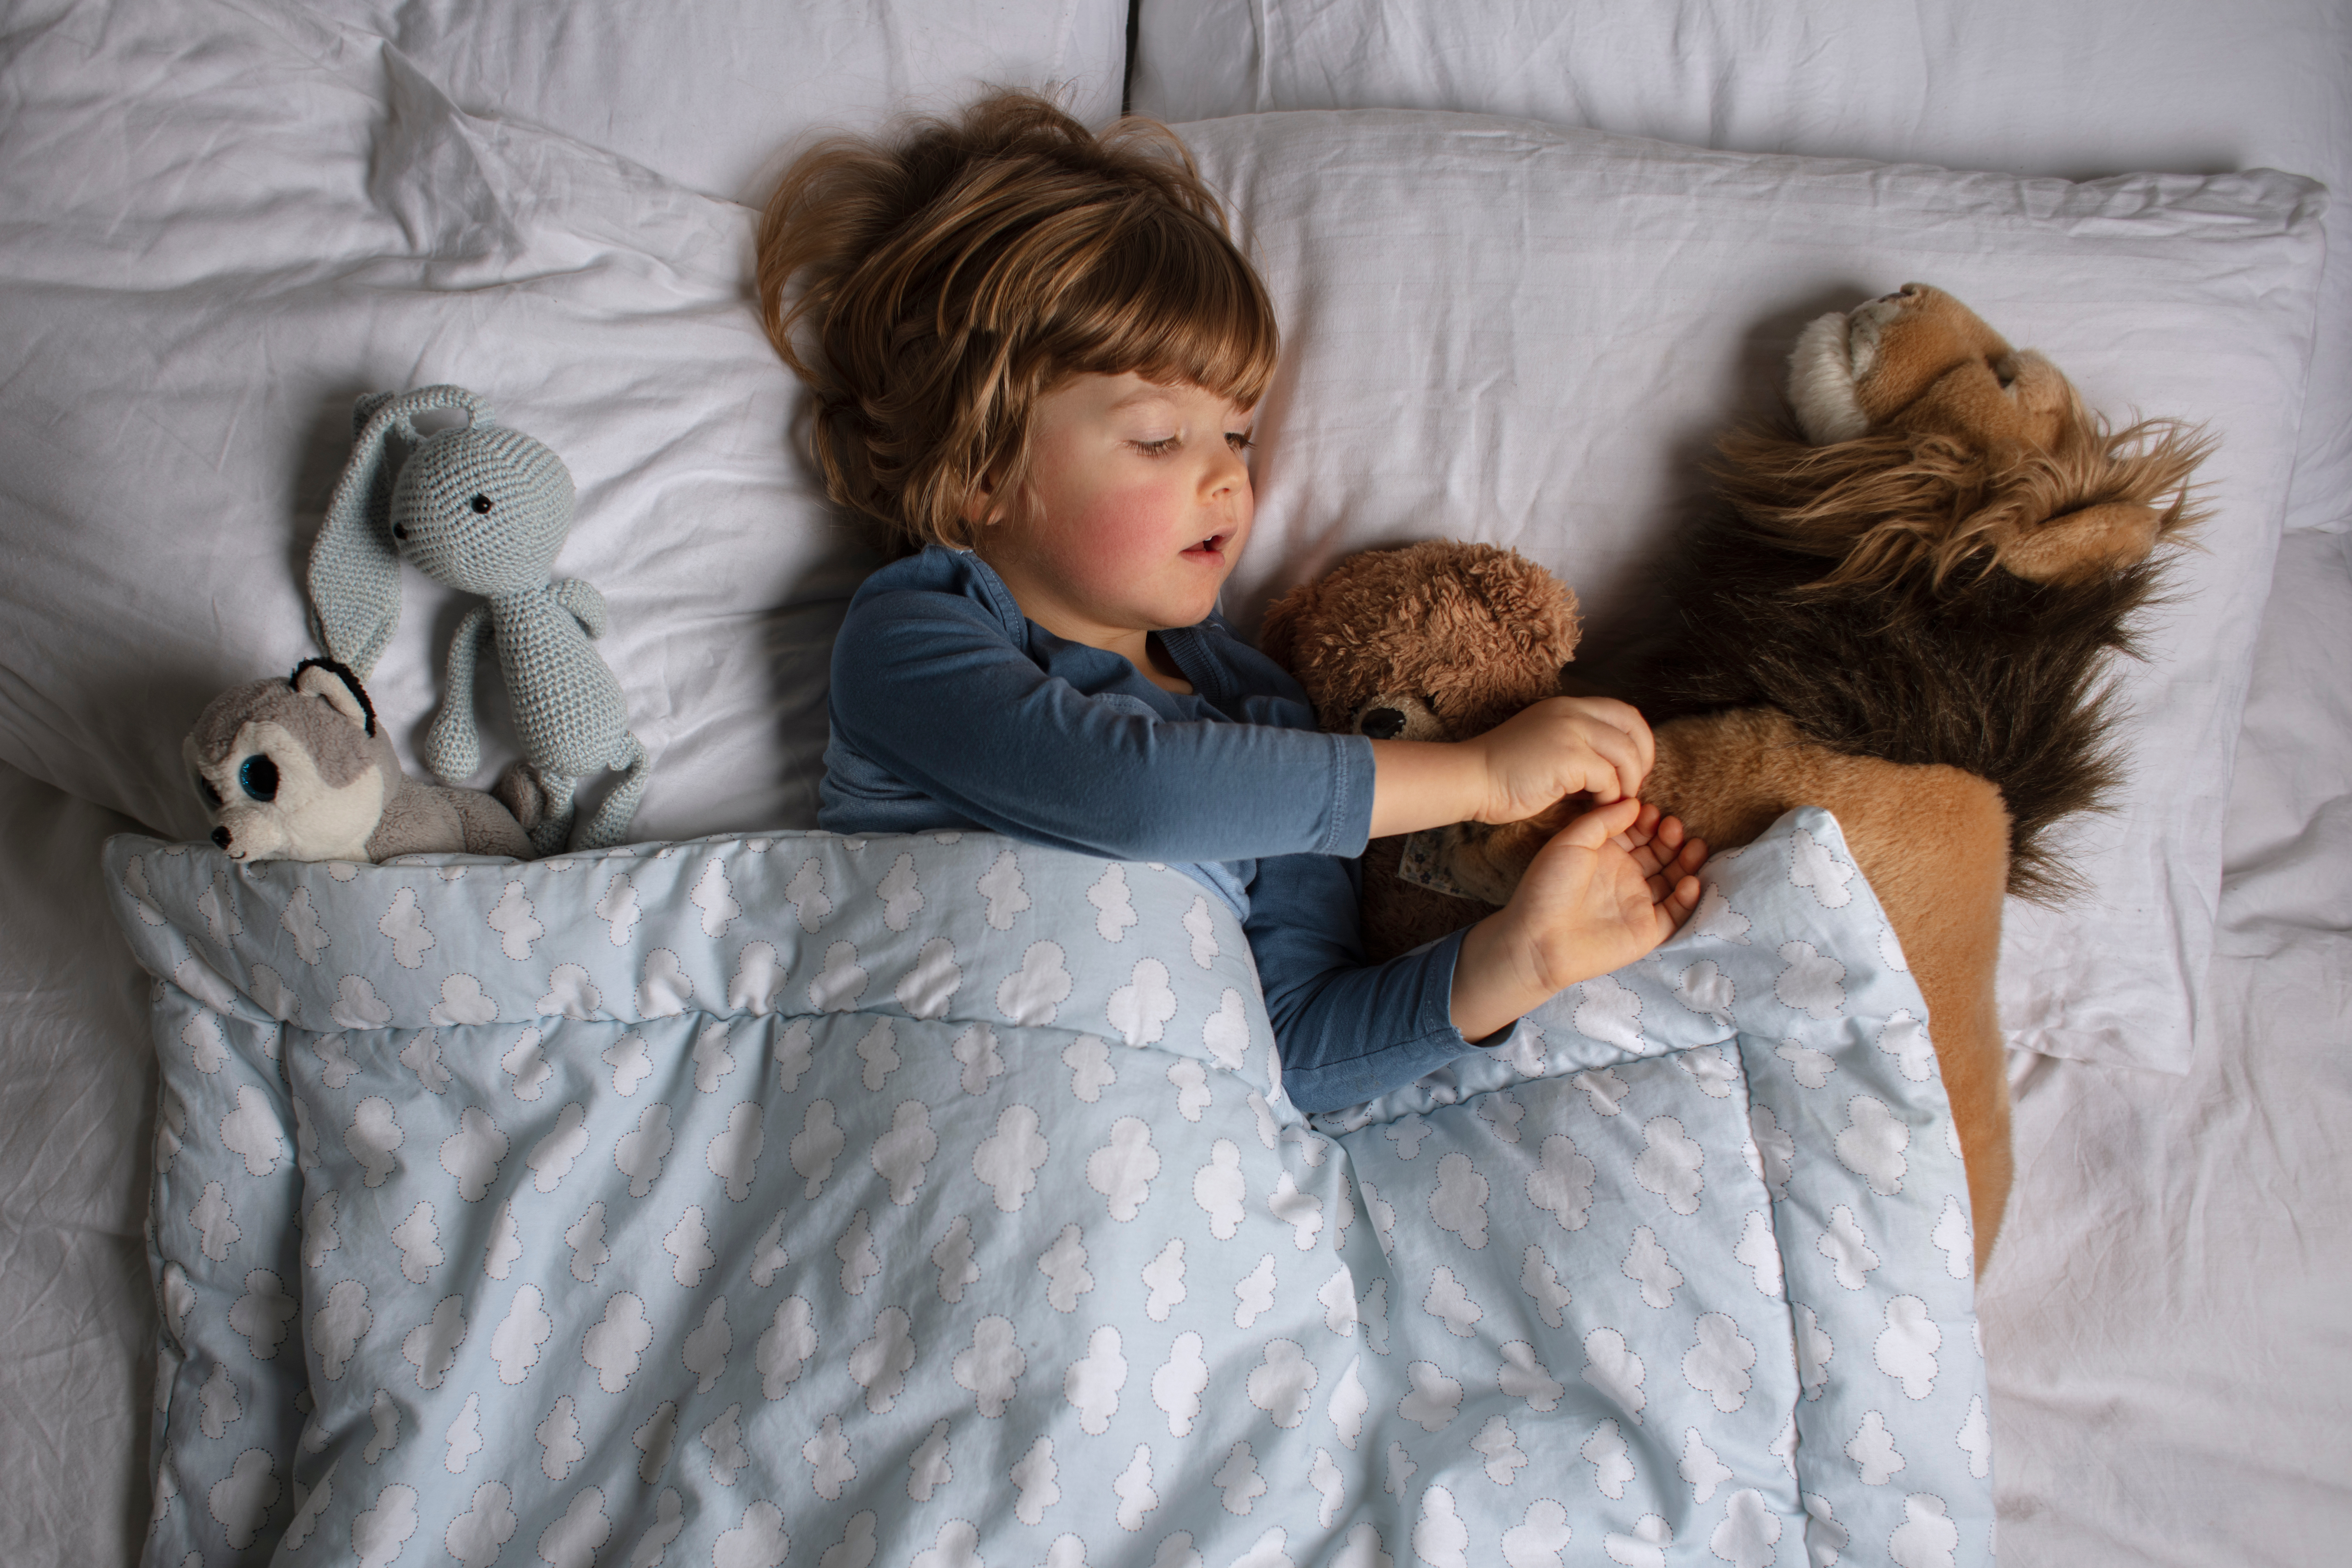 Can Teaching Your Child About Their Emotions Help Them Sleep Better?